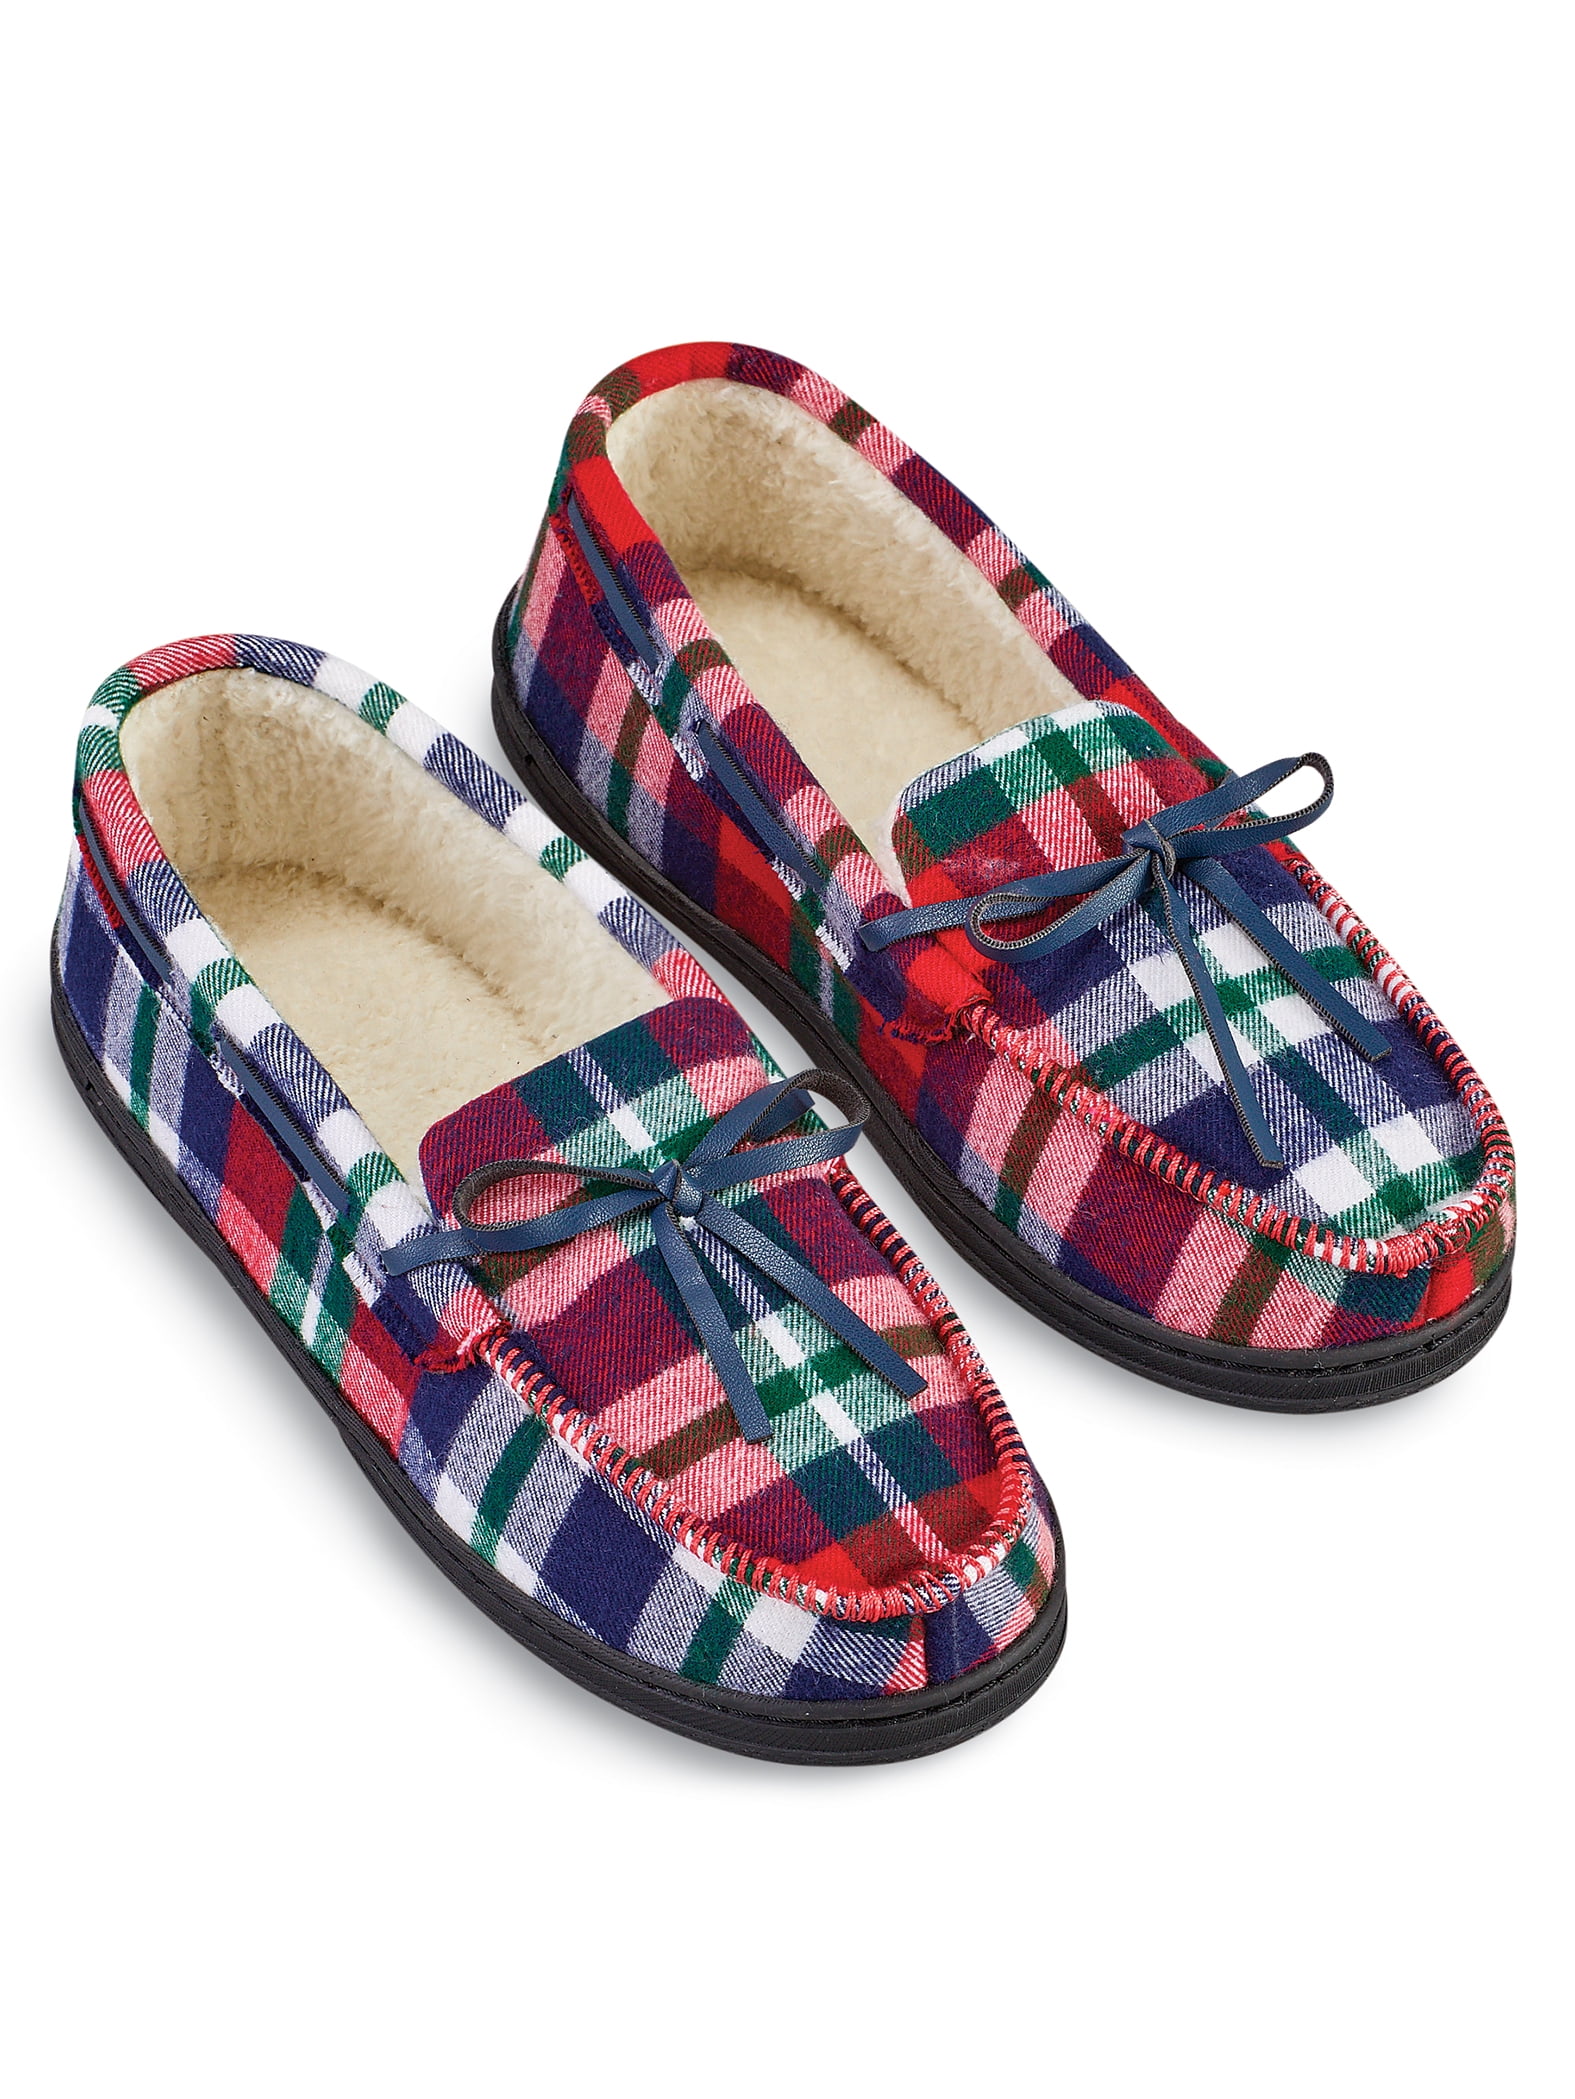 Collections Etc Women's Bright Plaid House Moccasin Slippers - Walmart.com